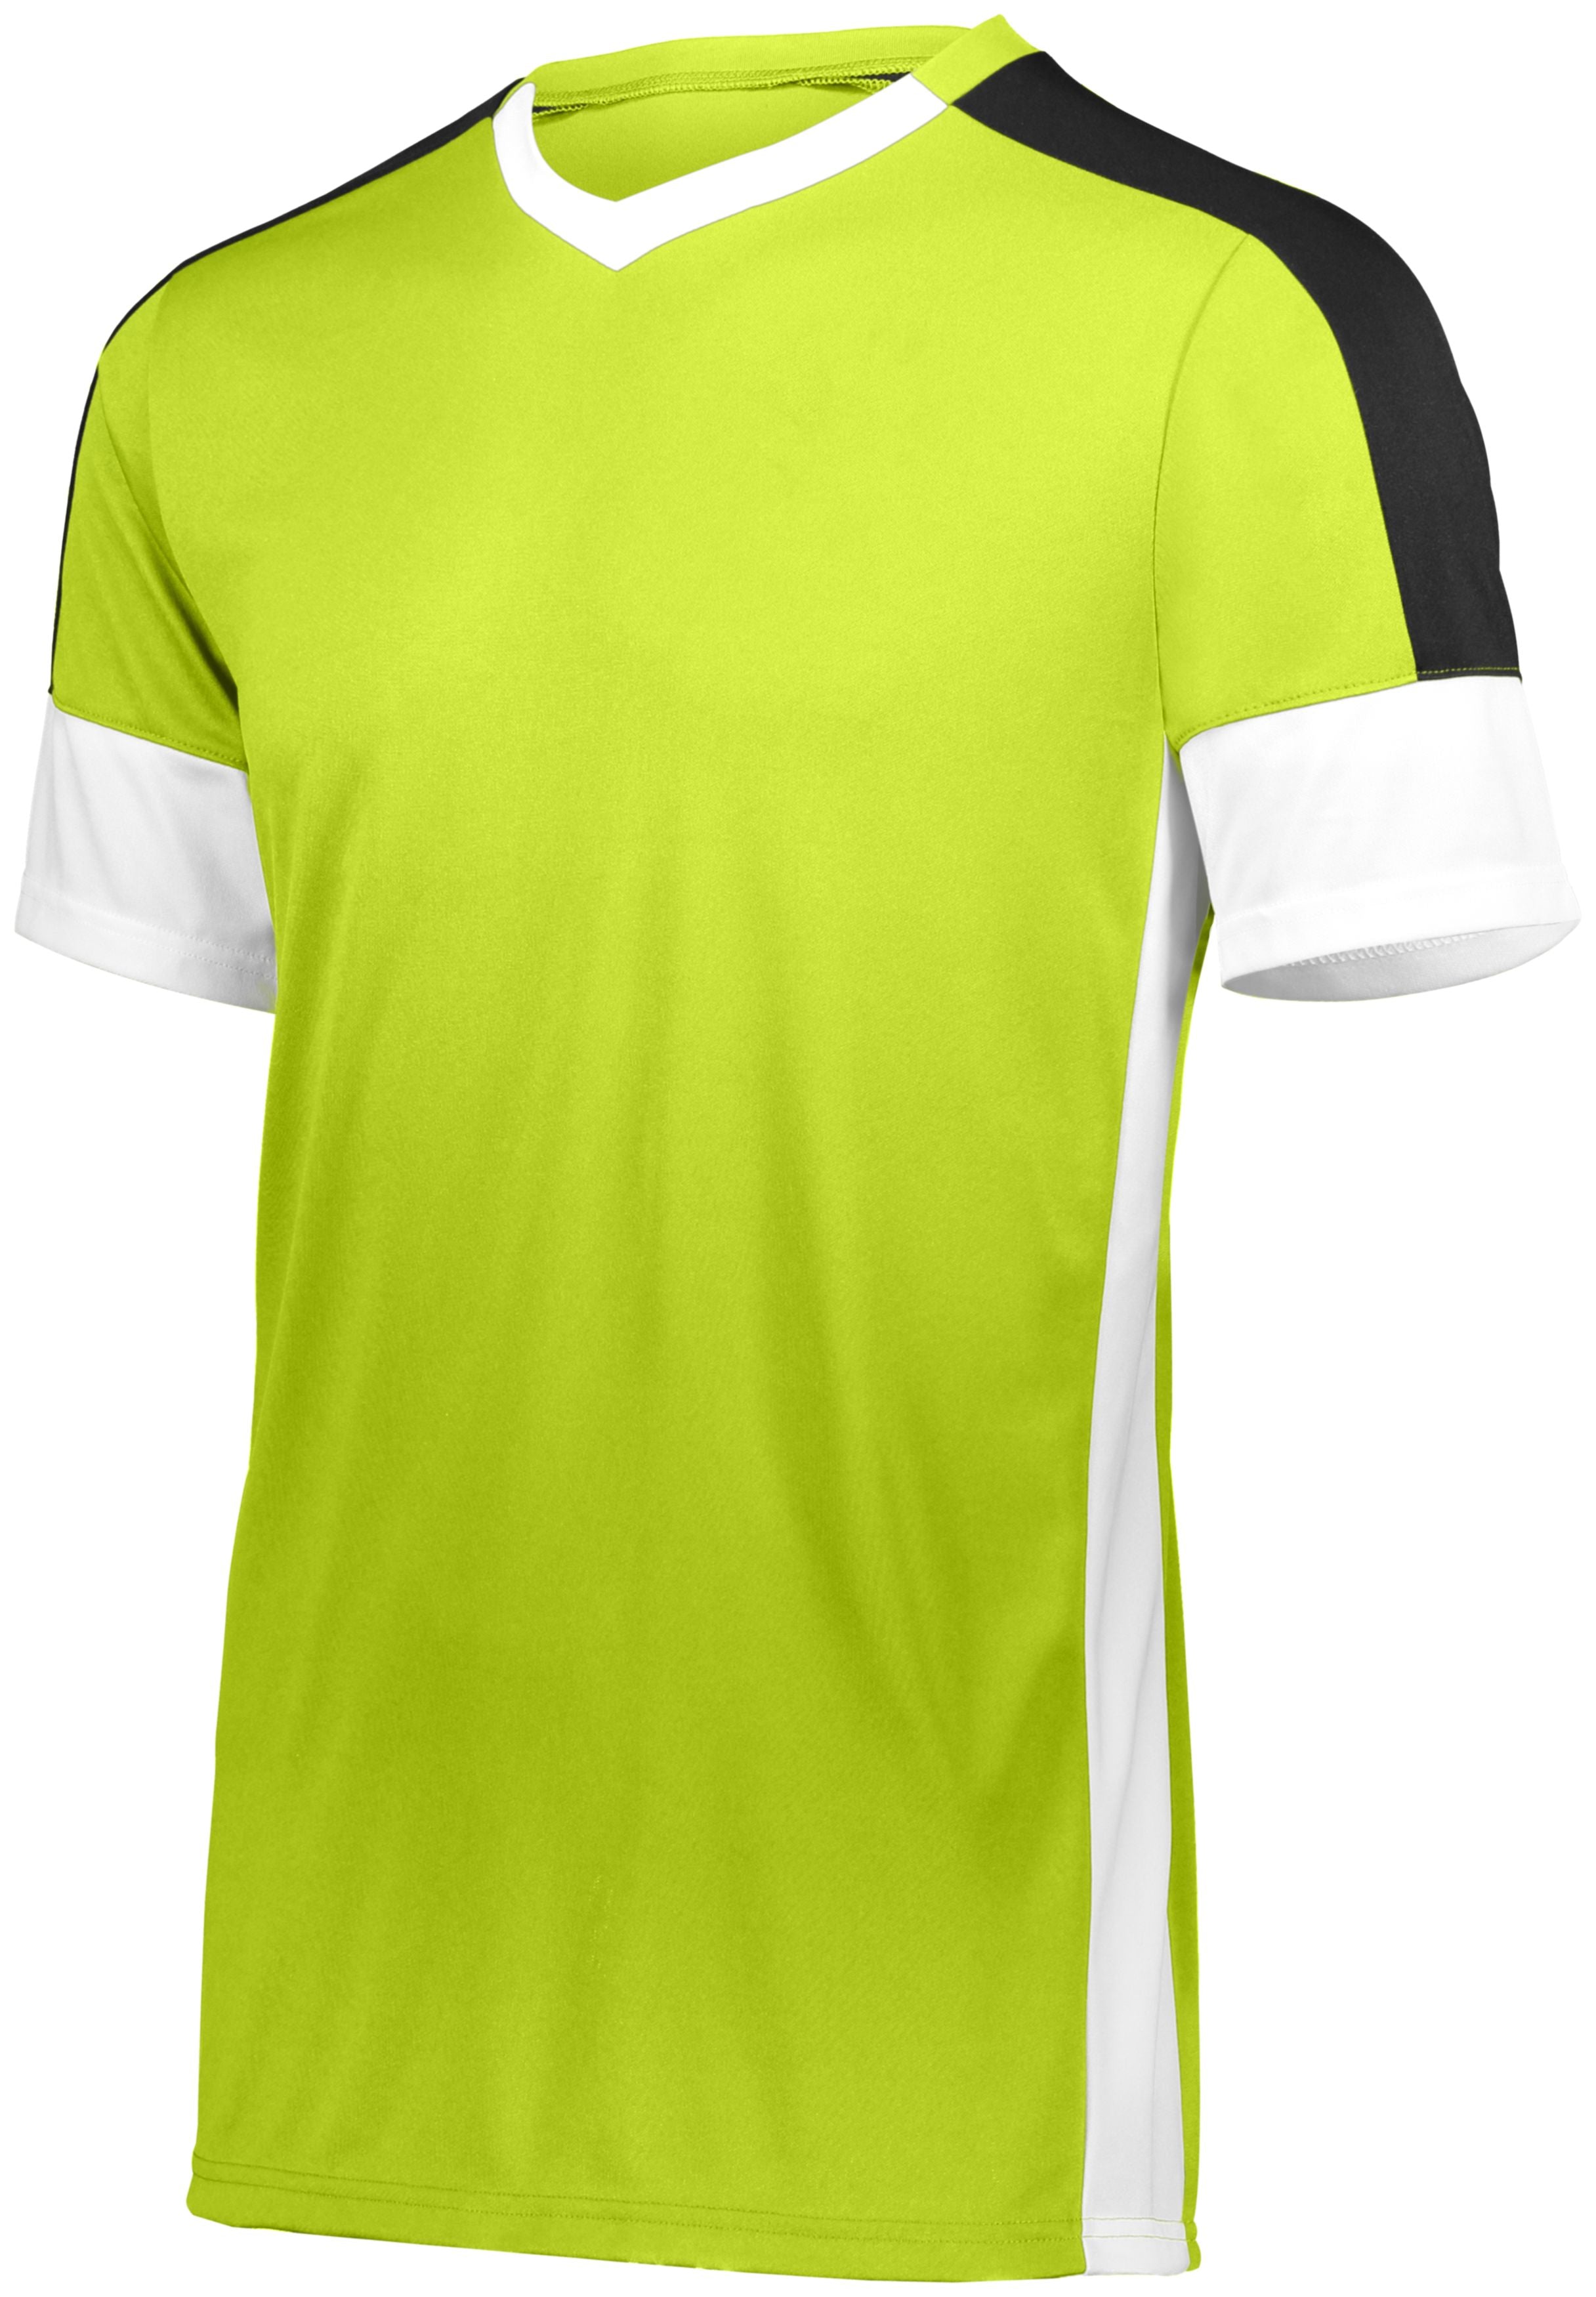 High 5 Youth Wembley Soccer Jersey in Lime/White/Black  -Part of the Youth, Youth-Jersey, High5-Products, Soccer, Shirts, All-Sports-1 product lines at KanaleyCreations.com